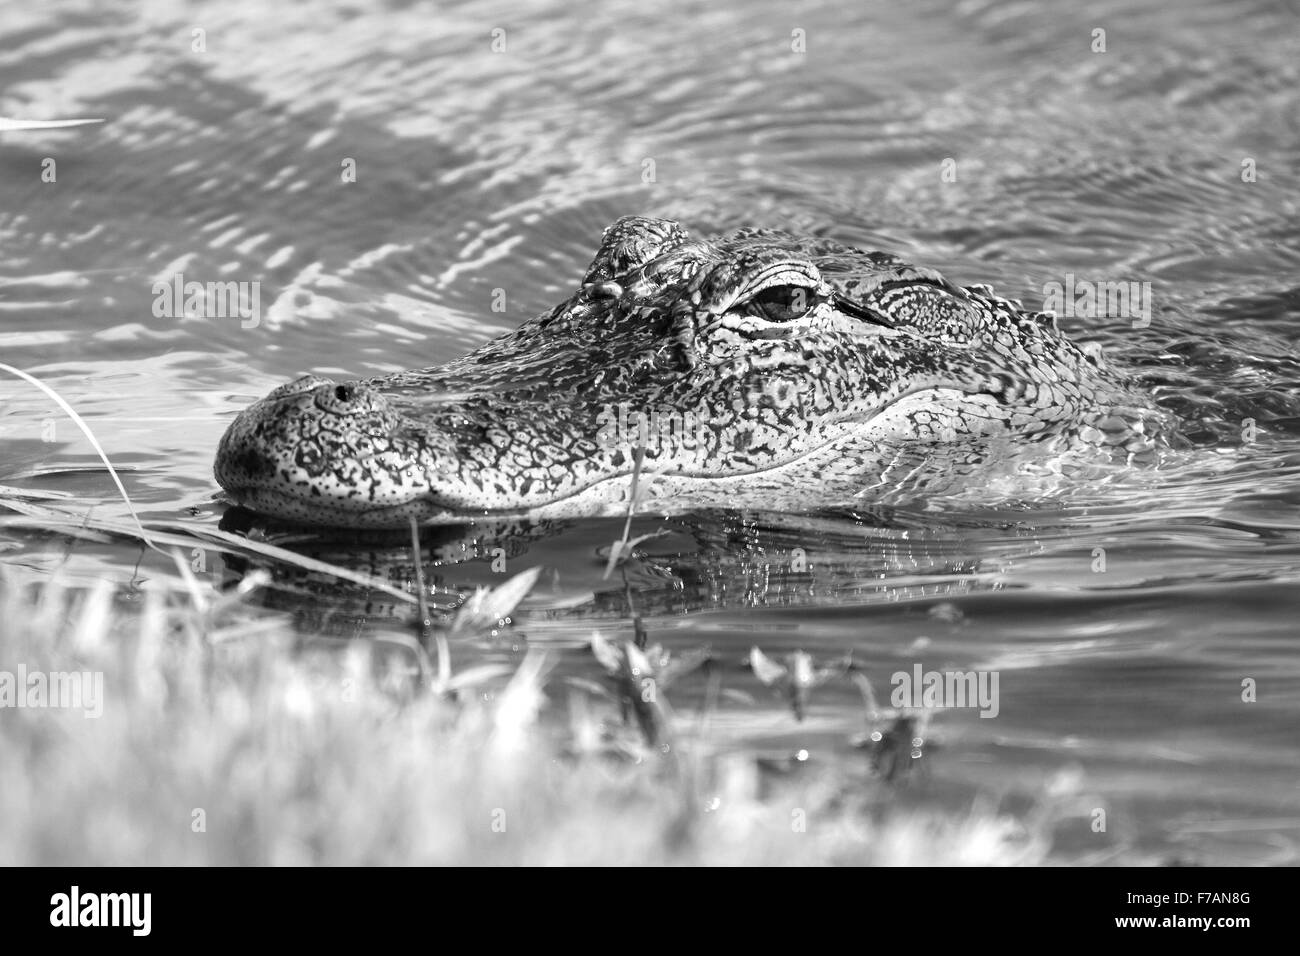 Headshot of an Alligator coming into shore. Stock Photo